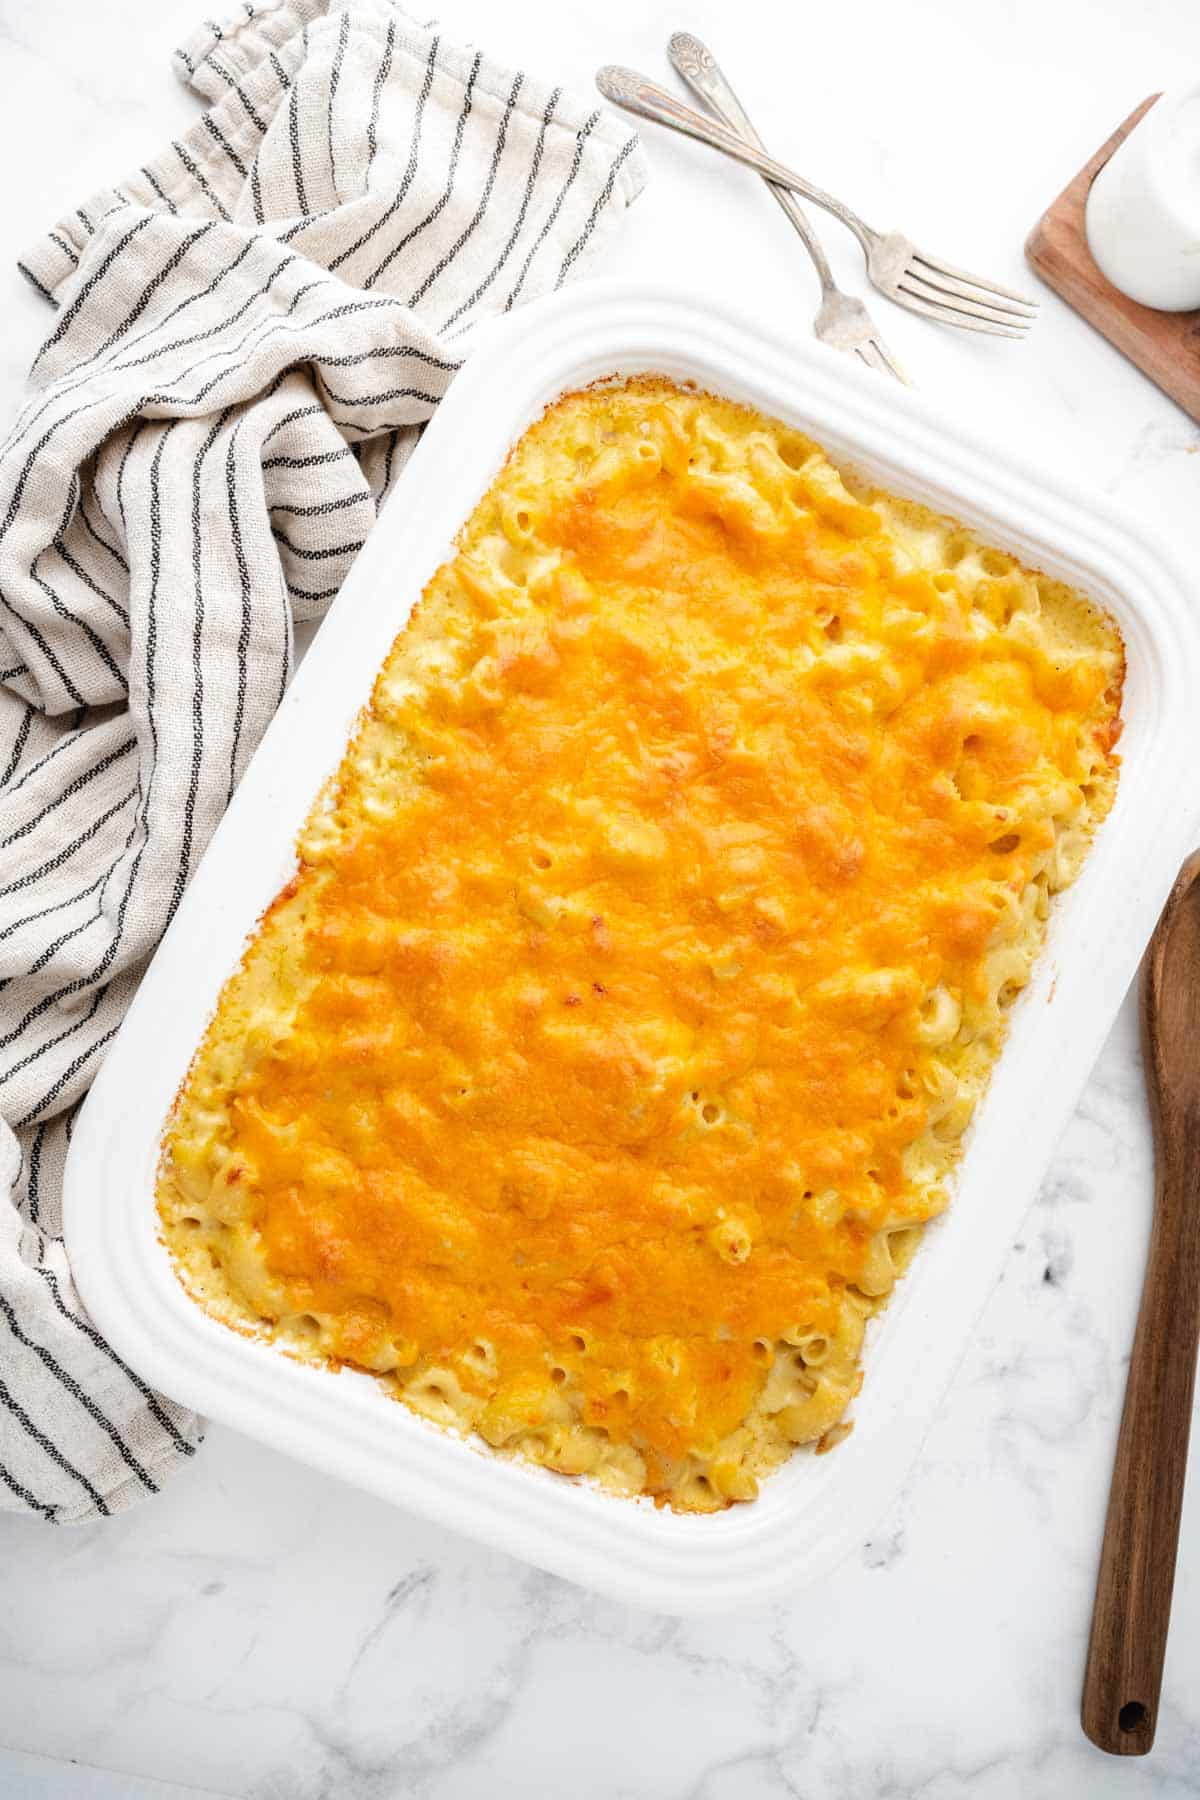 A white casserole dish filled with creamy baked macaroni and cheese.